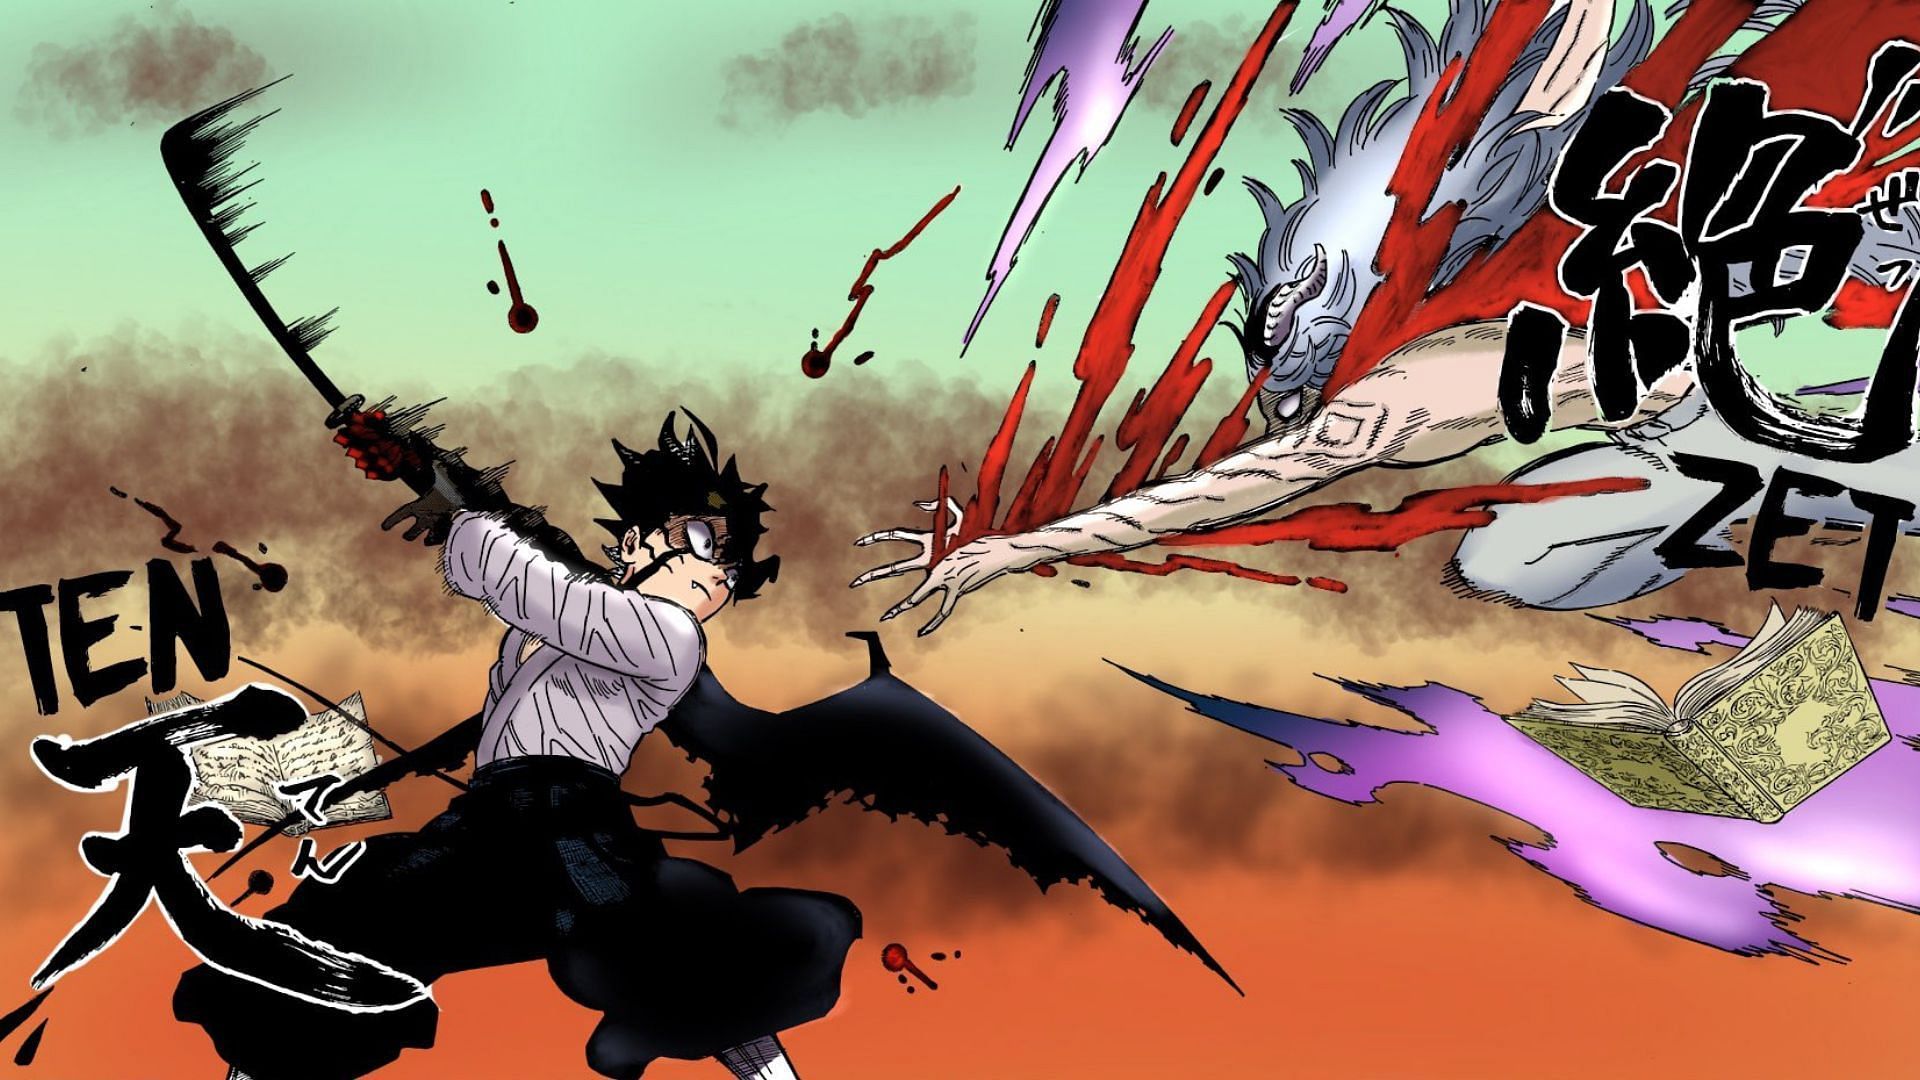 Asta defeating Paladin Yrul in Black Clover chapter 348 (Image via Twitter/@masterultra233)